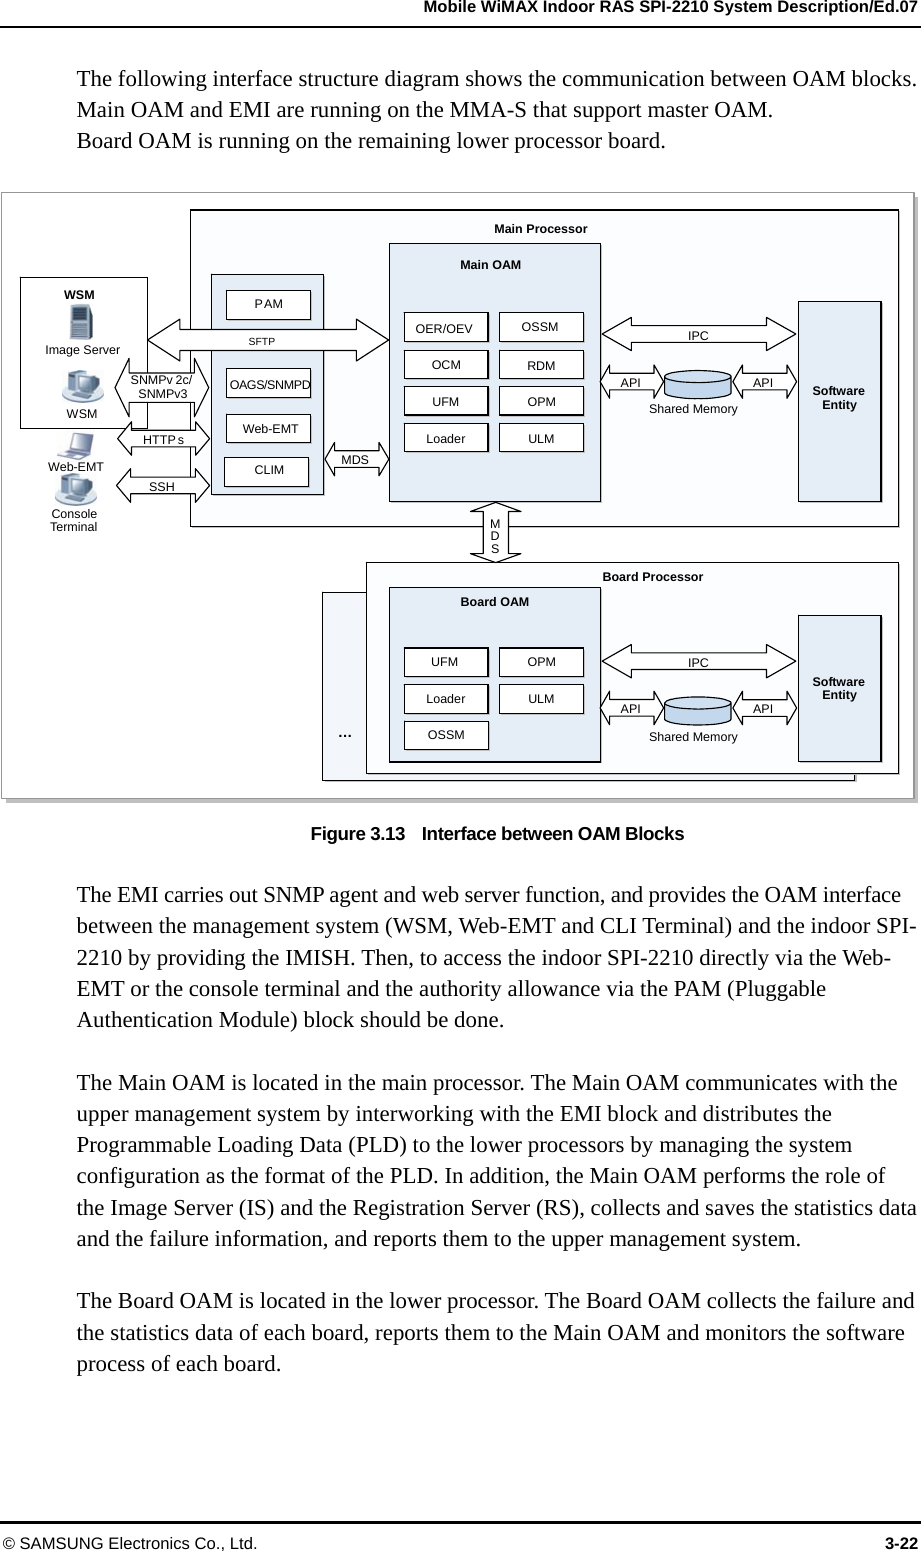   Mobile WiMAX Indoor RAS SPI-2210 System Description/Ed.07 © SAMSUNG Electronics Co., Ltd.  3-22 The following interface structure diagram shows the communication between OAM blocks. Main OAM and EMI are running on the MMA-S that support master OAM.   Board OAM is running on the remaining lower processor board.  Figure 3.13    Interface between OAM Blocks  The EMI carries out SNMP agent and web server function, and provides the OAM interface between the management system (WSM, Web-EMT and CLI Terminal) and the indoor SPI-2210 by providing the IMISH. Then, to access the indoor SPI-2210 directly via the Web-EMT or the console terminal and the authority allowance via the PAM (Pluggable Authentication Module) block should be done.  The Main OAM is located in the main processor. The Main OAM communicates with the upper management system by interworking with the EMI block and distributes the Programmable Loading Data (PLD) to the lower processors by managing the system configuration as the format of the PLD. In addition, the Main OAM performs the role of the Image Server (IS) and the Registration Server (RS), collects and saves the statistics data and the failure information, and reports them to the upper management system.    The Board OAM is located in the lower processor. The Board OAM collects the failure and the statistics data of each board, reports them to the Main OAM and monitors the software process of each board.  DDIIFMMDSMain ProcessorMain OAMSoftwareEntity IPCAPIAPIShared Memory OCM RDMUFM OPMLoaderULMEMIWeb-EMT WSM Image Server WSMSFTP SNMPv 2c/SNMPv3 Board OAMUFM OPMLoaderULMOSSMBoard ProcessorSoftwareEntity IPCAPIAPIShared Memory MDS -…HTTP s SSHConsoleTerminal CLIMP AMOSSMOER/OEV MDSOAGS/SNMPD Web-EMT 